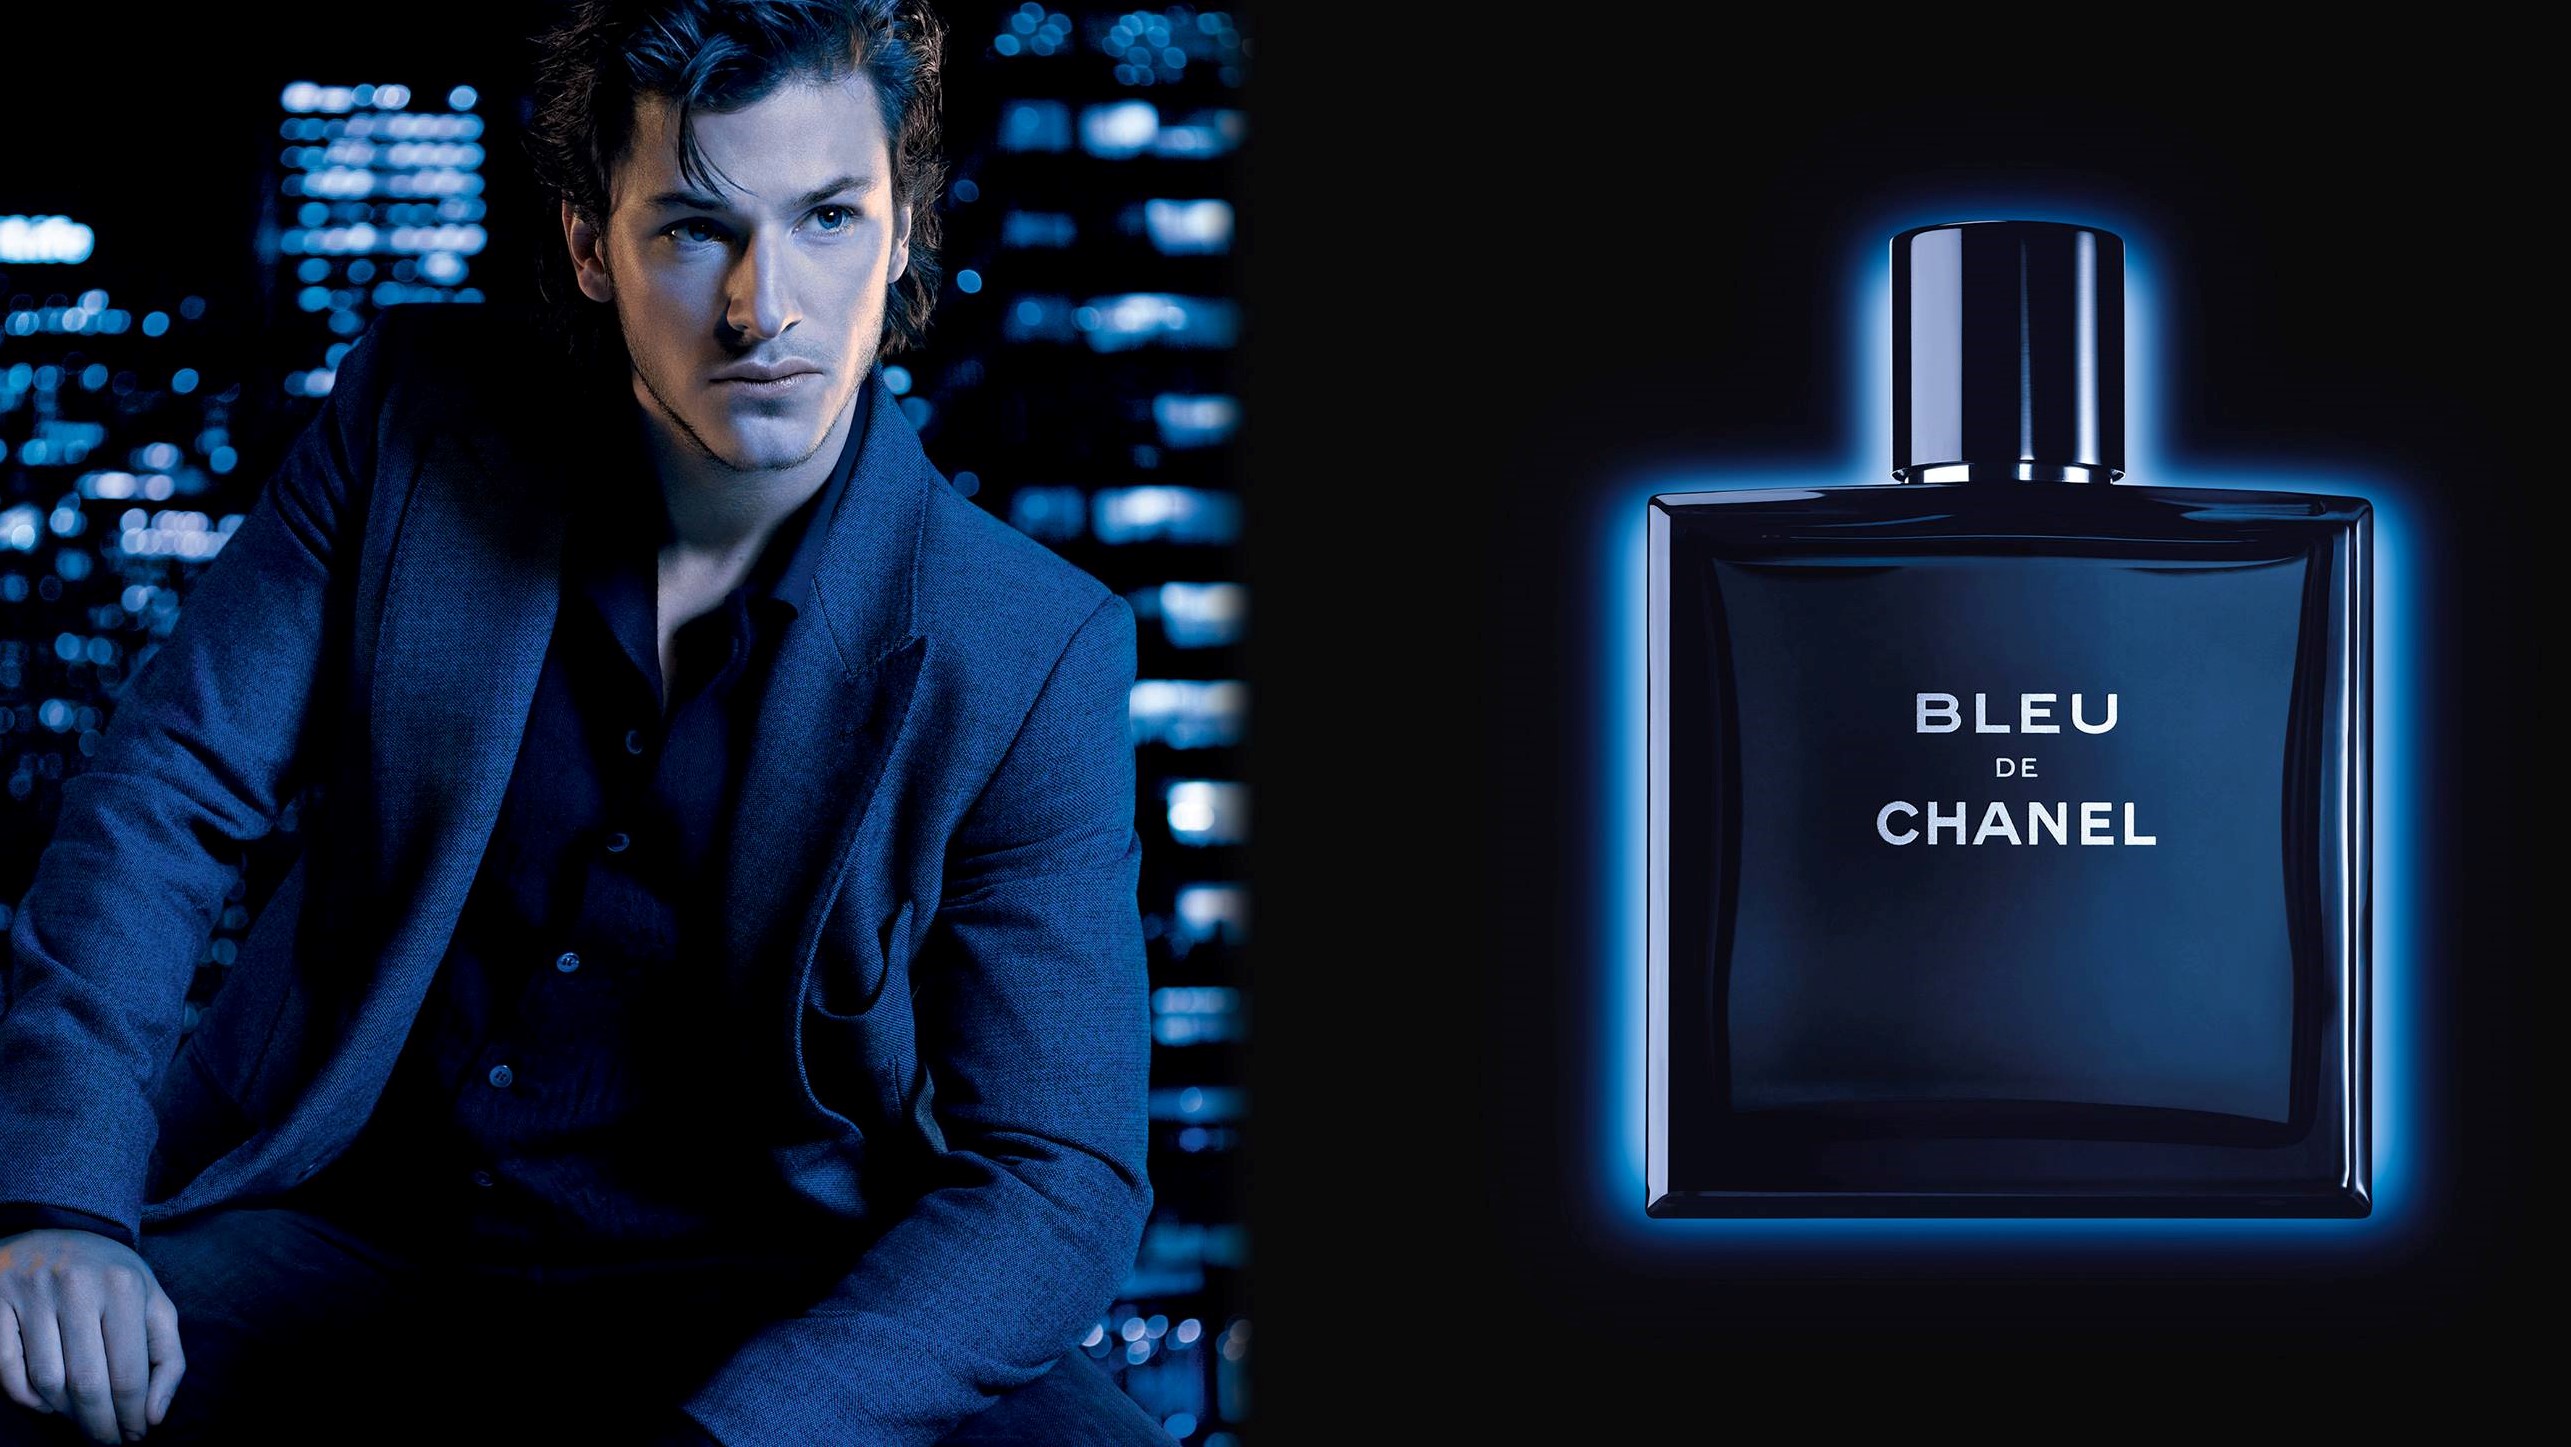 Chanel - Bleu de Chanel review : Handsome and refined • Scentertainer